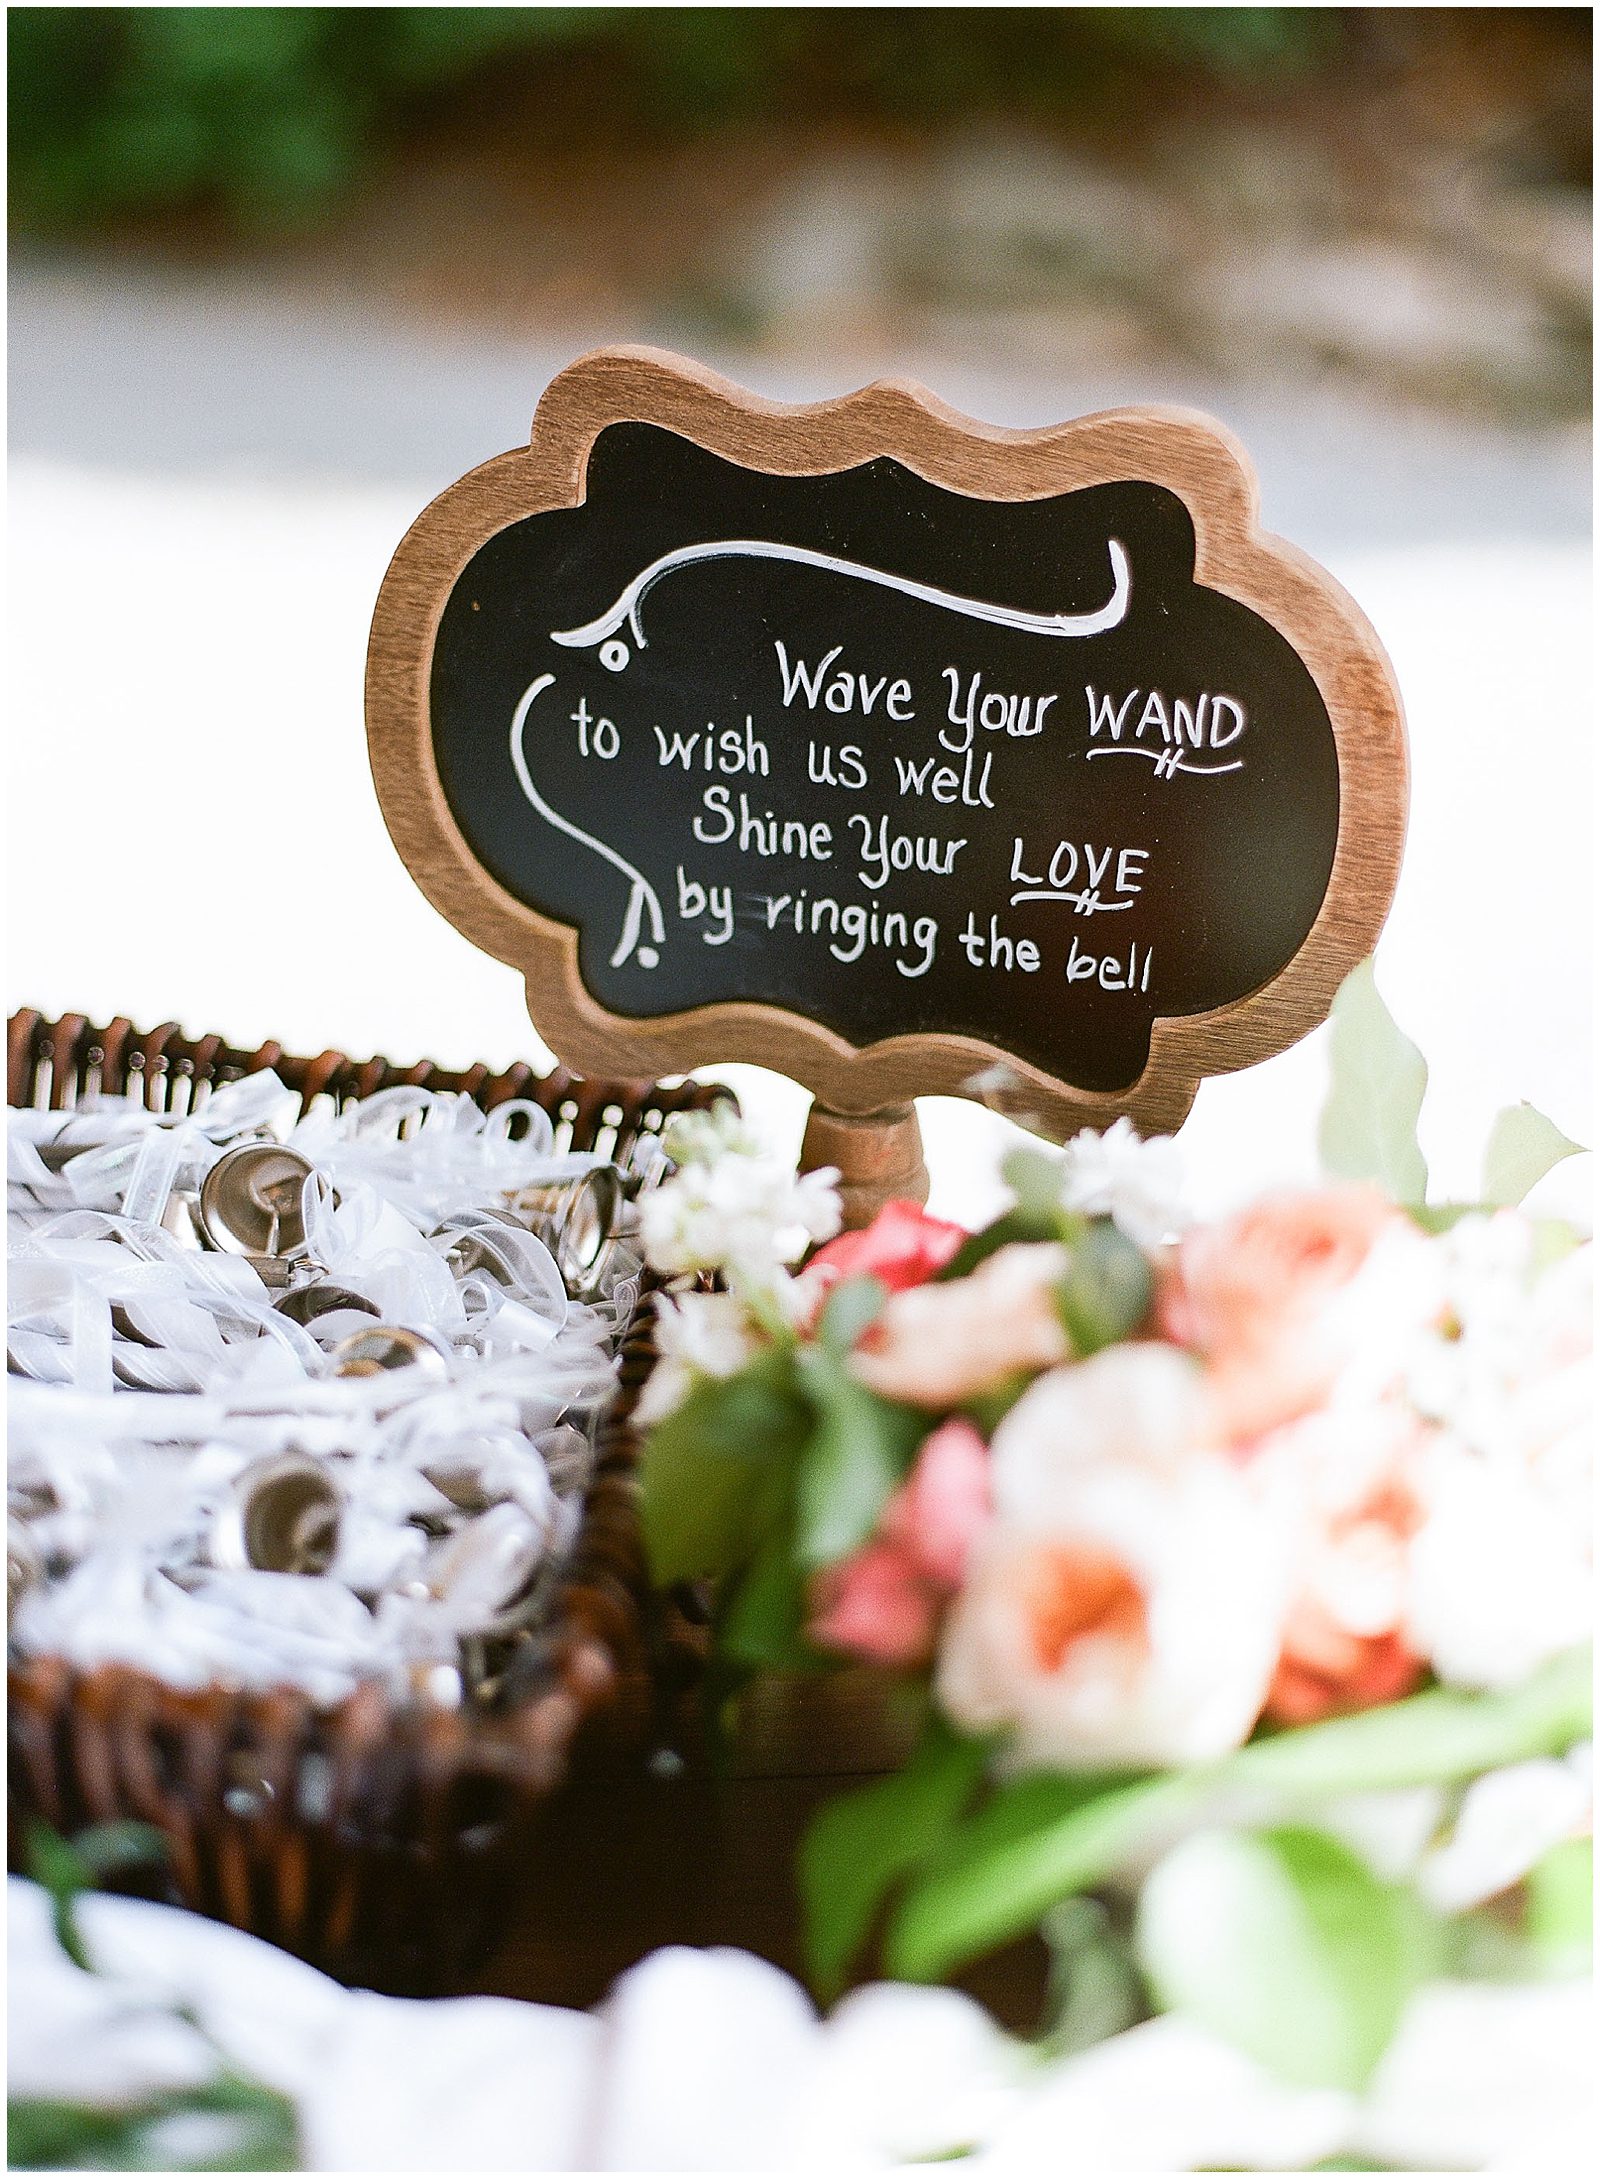 Sign and Basket of Wands for Wedding Exit Photo